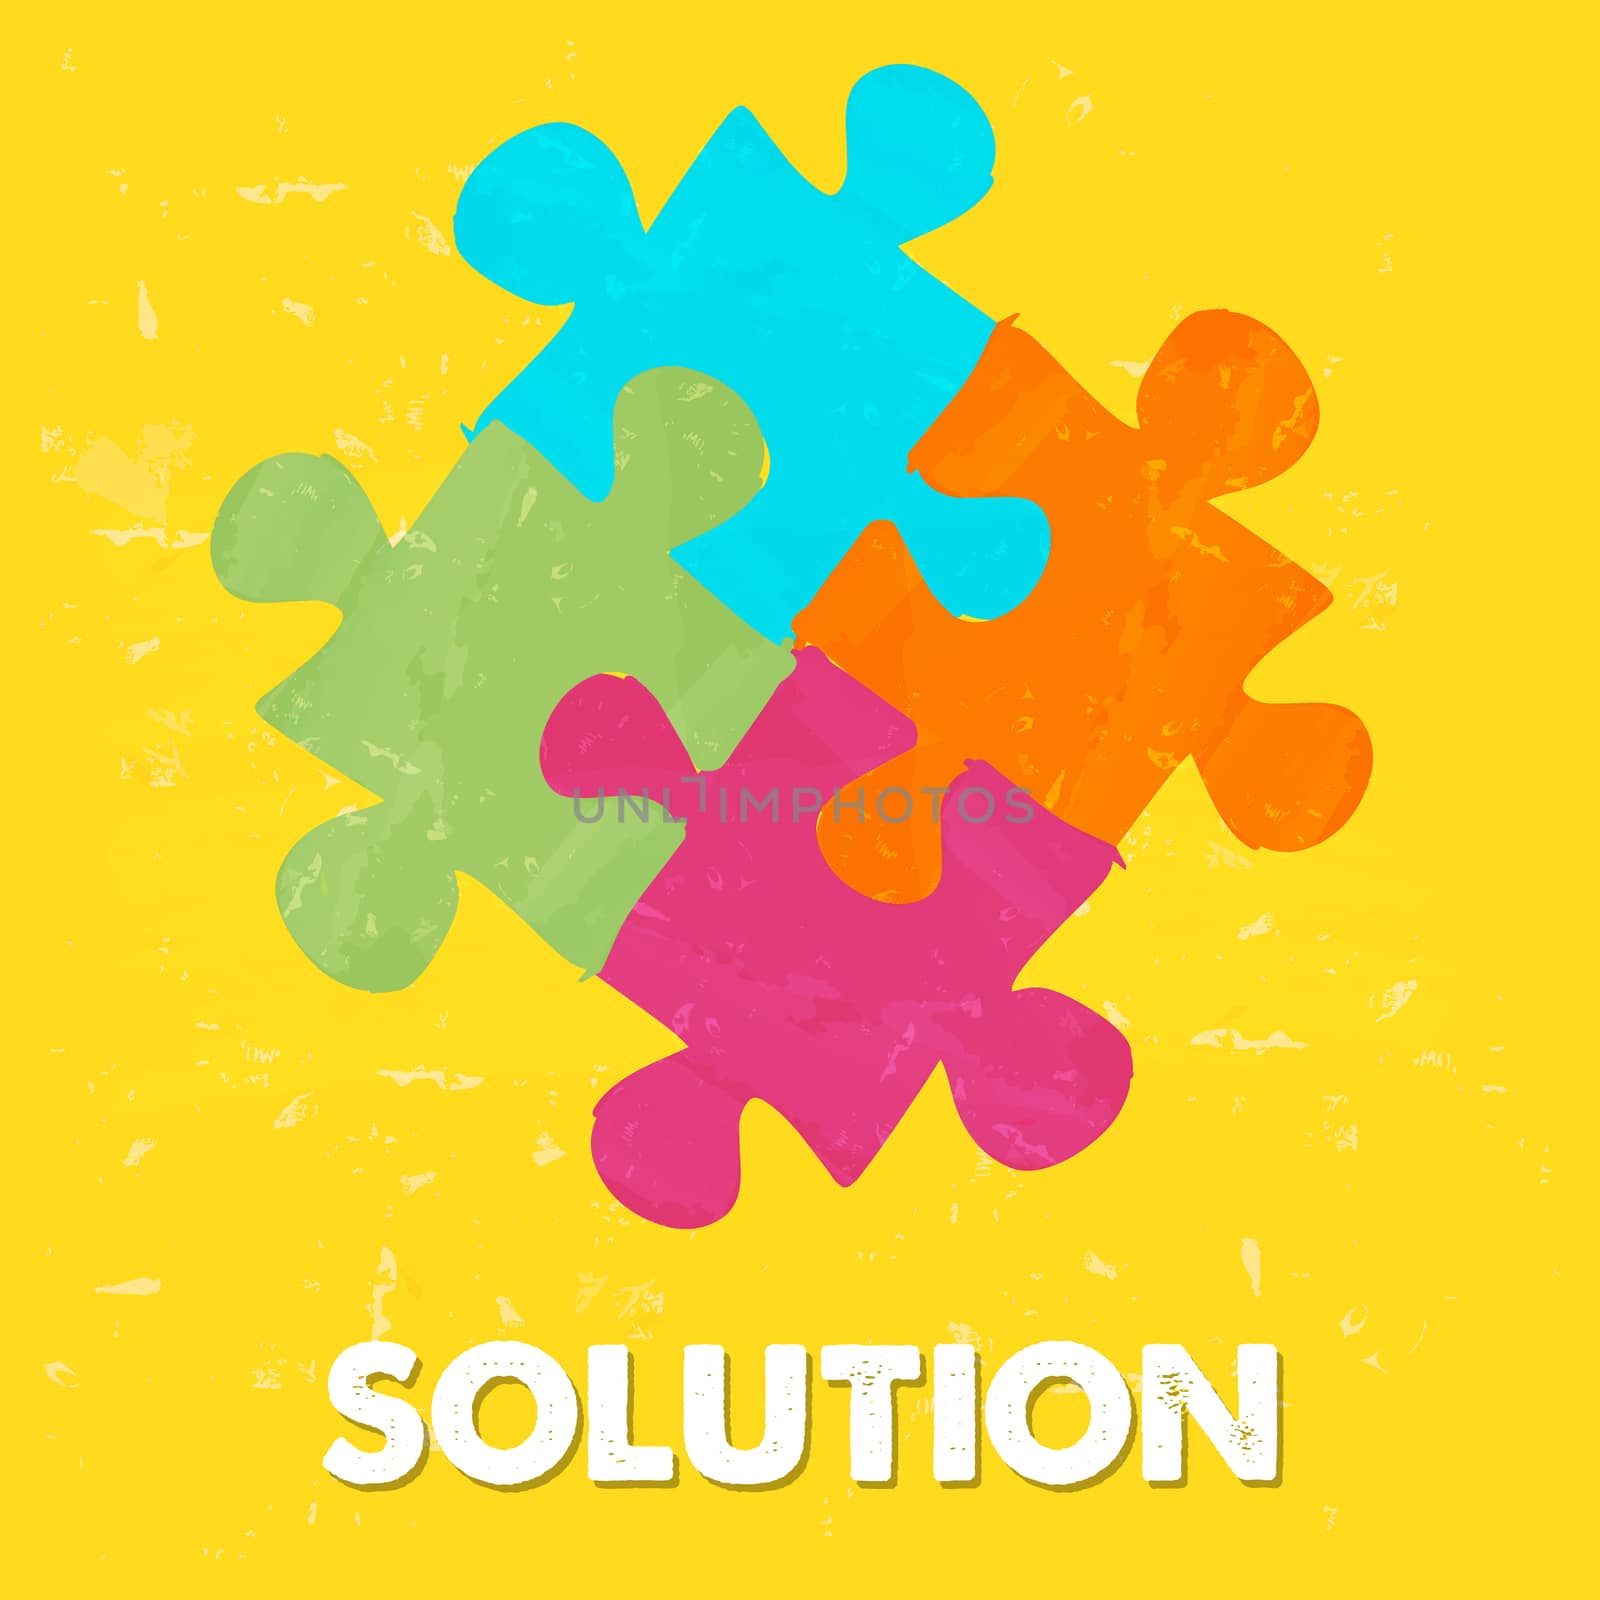 solution and puzzle pieces in grunge drawn style by marinini